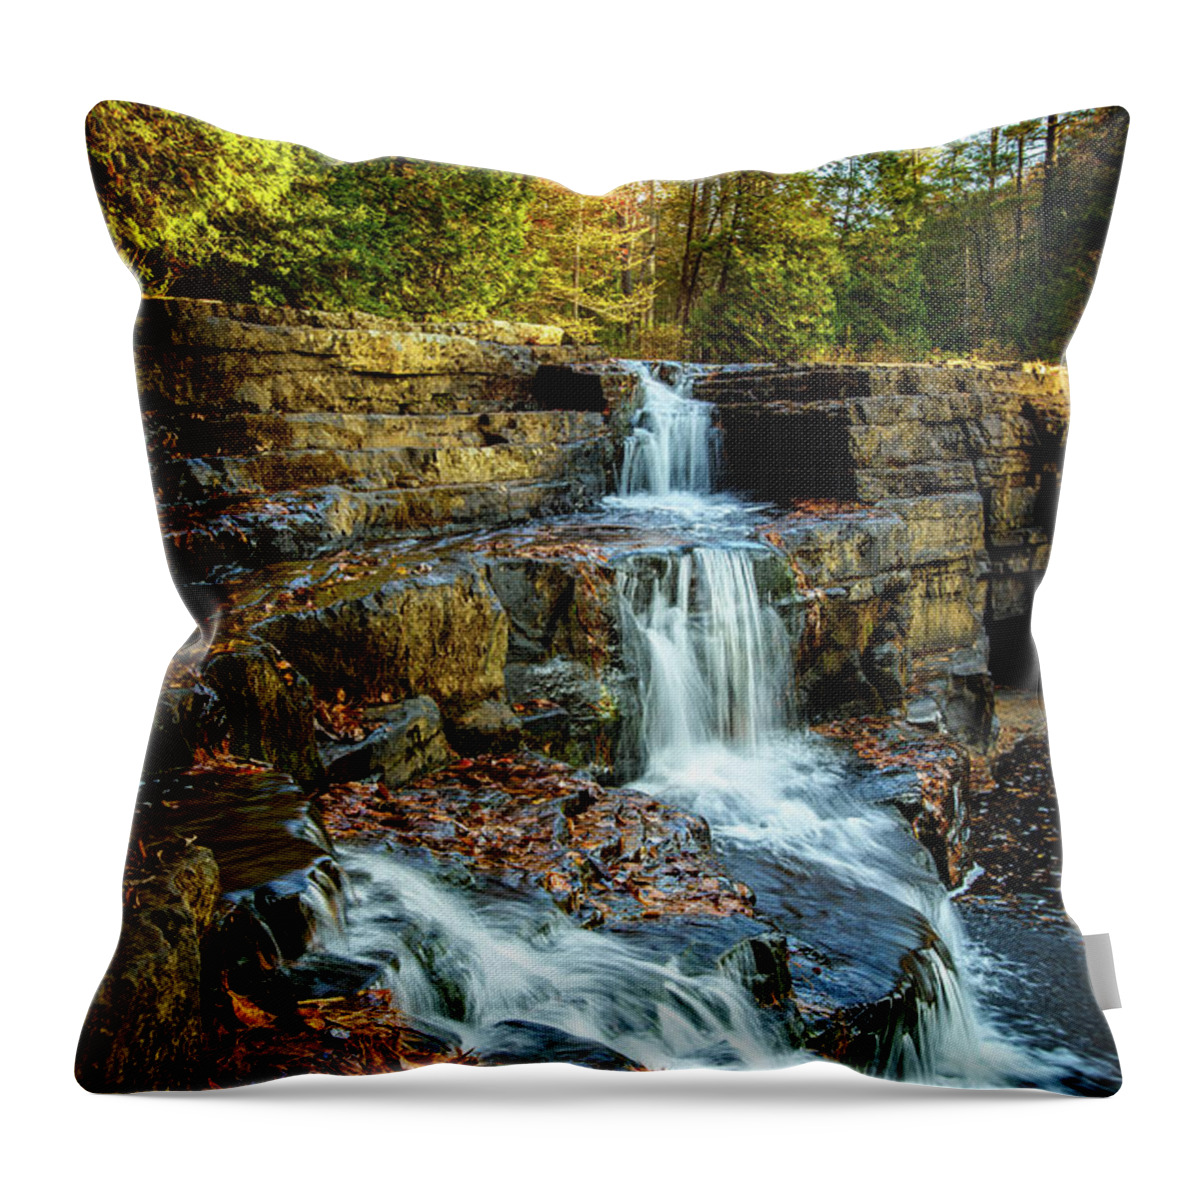 Landscape Throw Pillow featuring the photograph Dismal Falls #3 by Joe Shrader